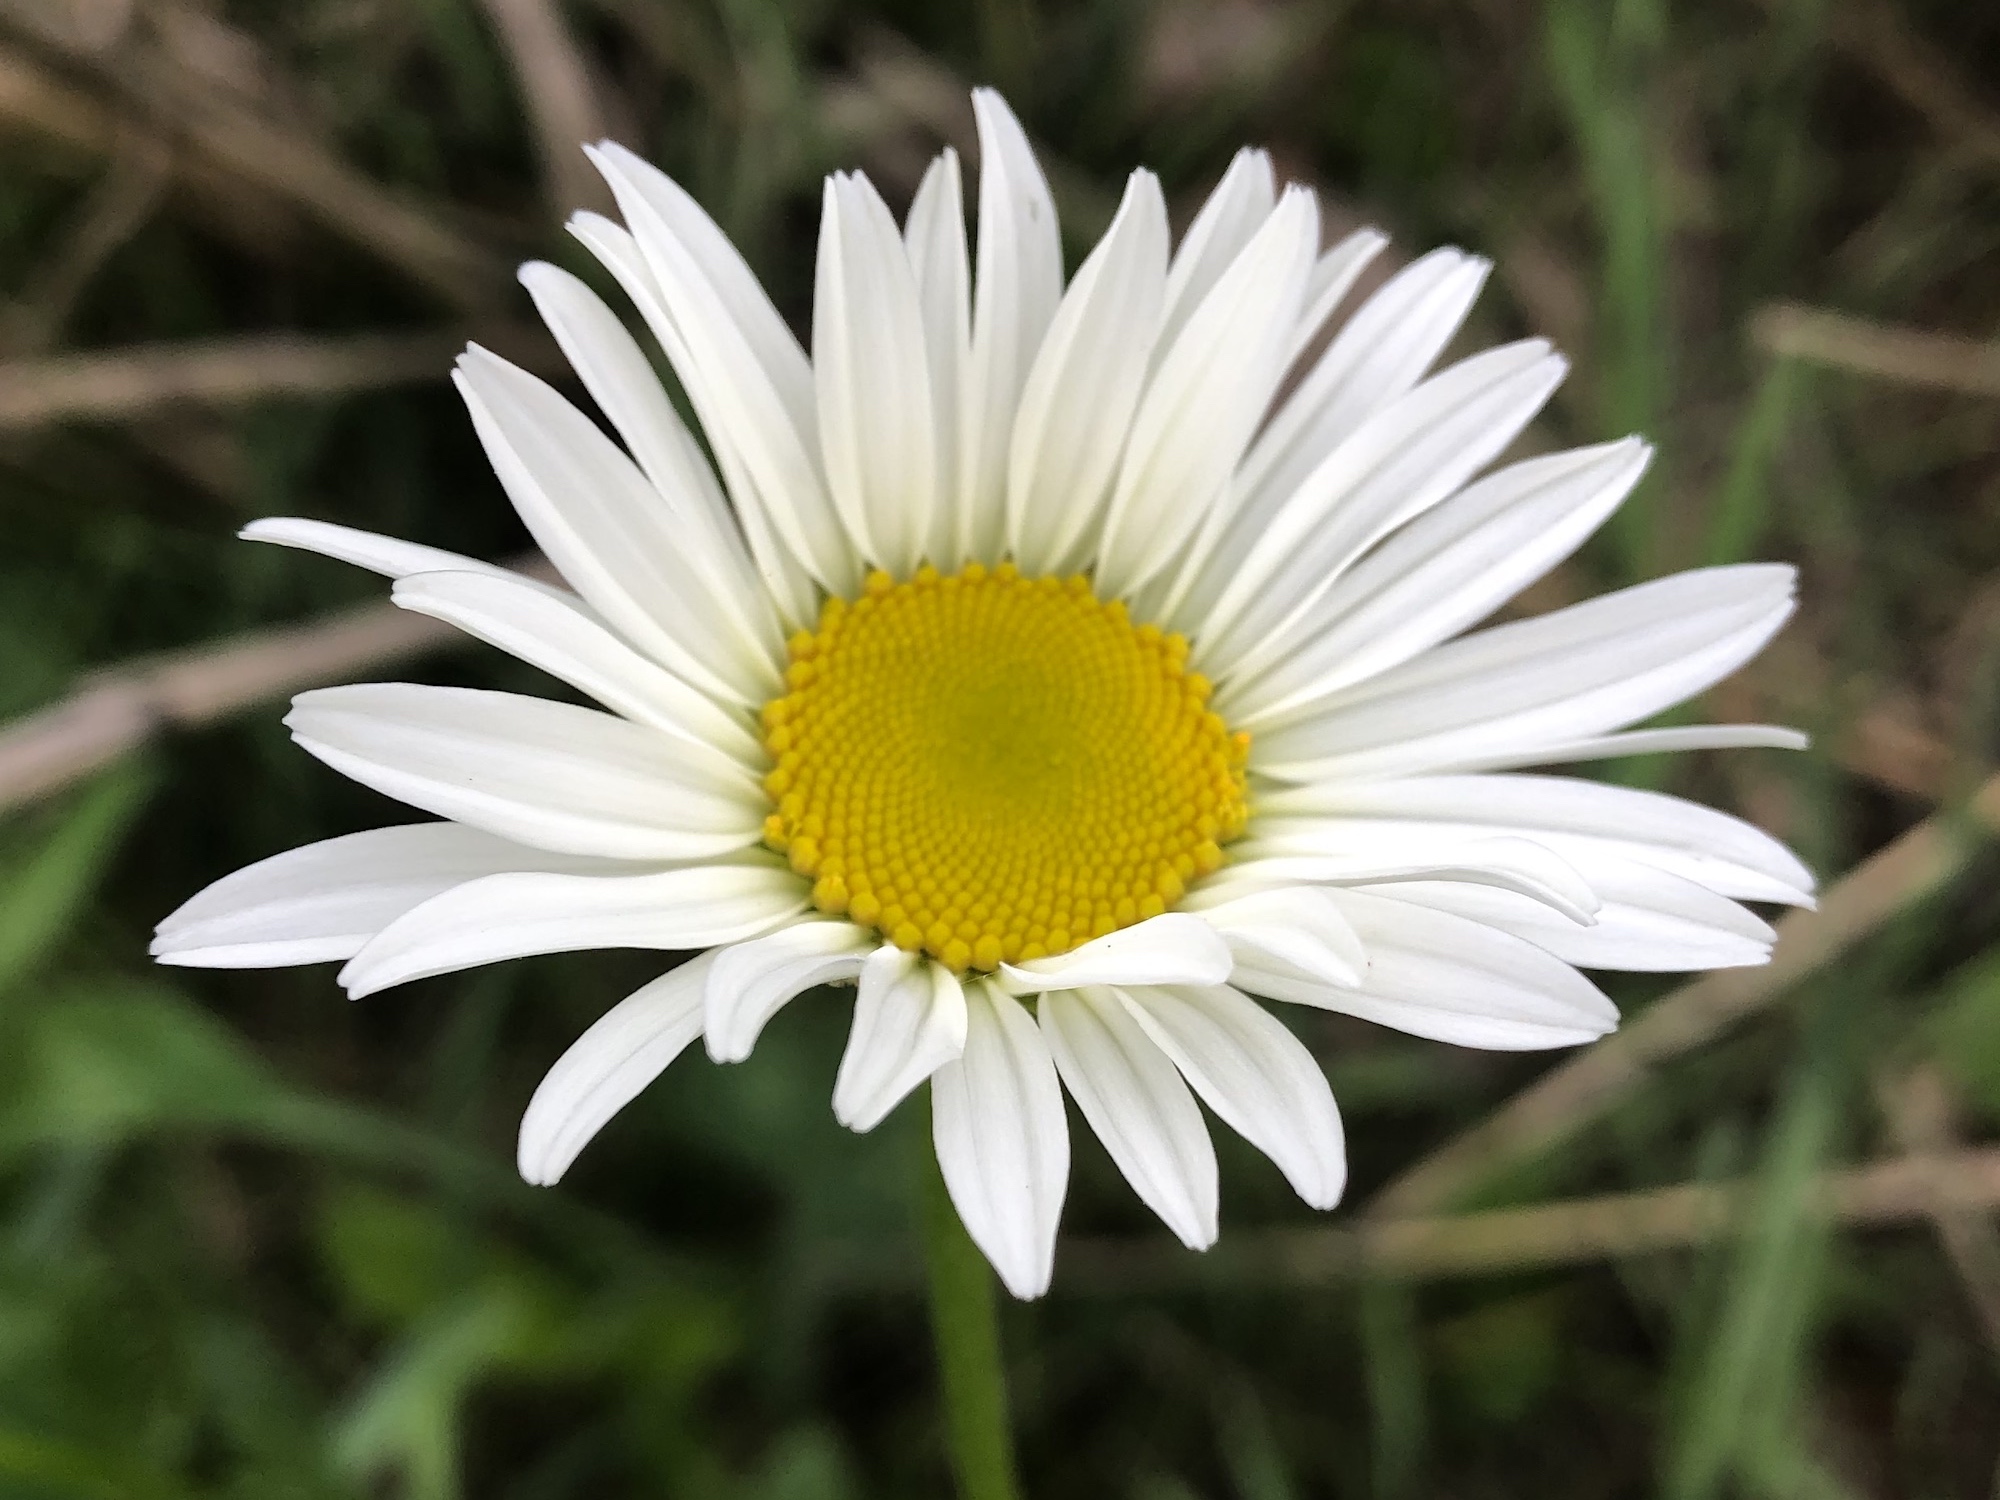 Ox-eye Daisy on bank of retaining pond in Madison, Wisconsin on June 1, 2020.